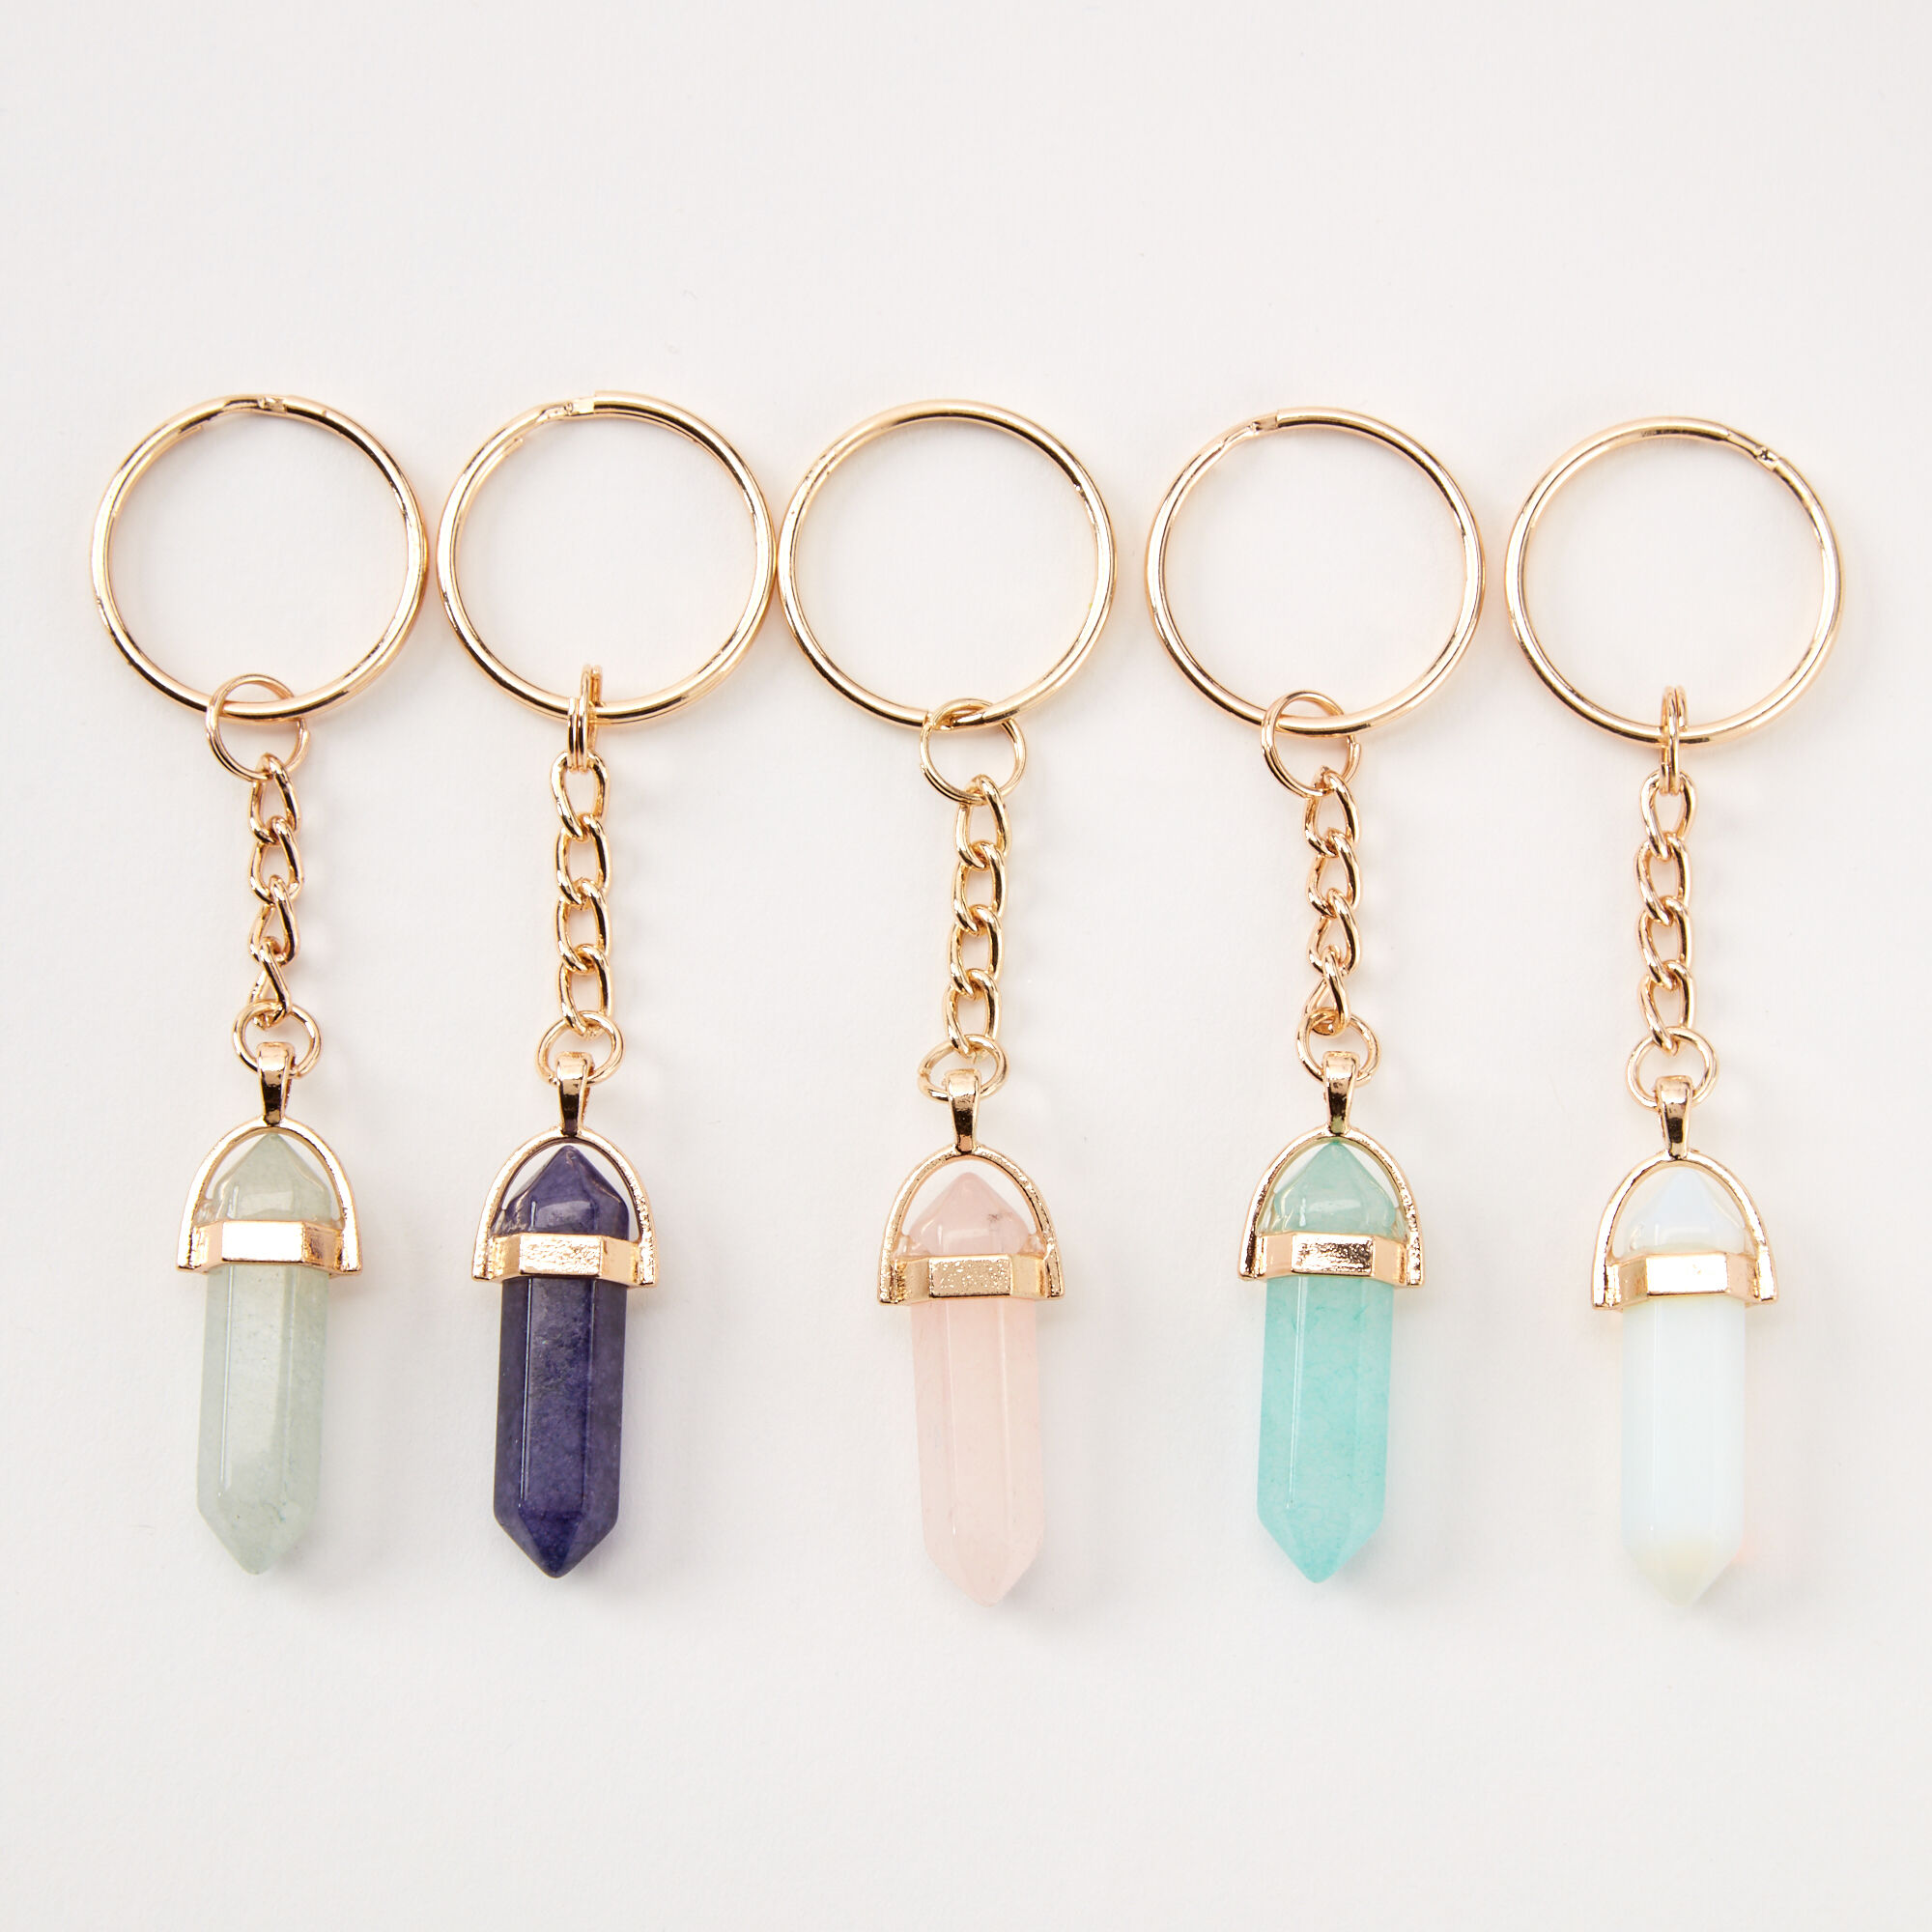 View Claires Pastel Crystal Best Friends Keyrings 5 Pack Gold information